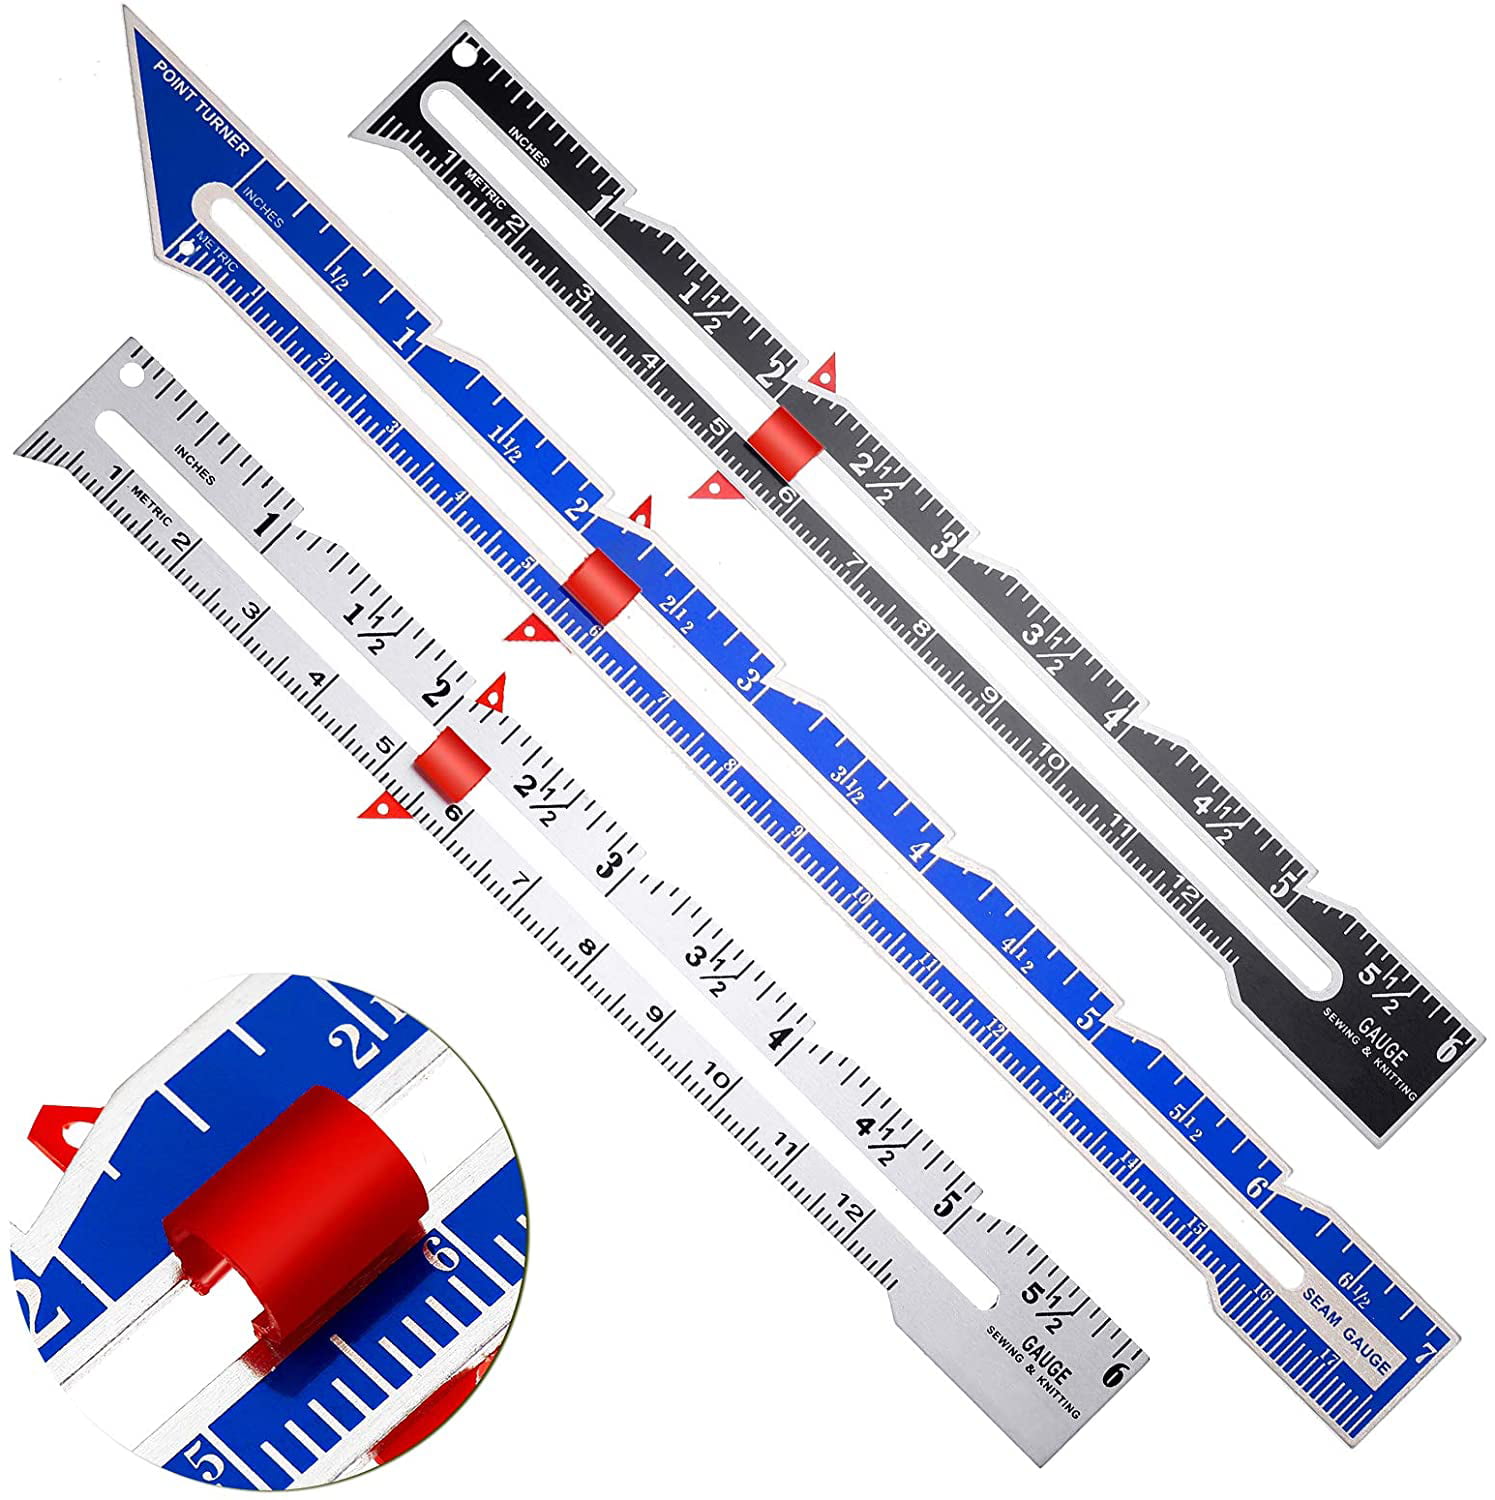 Tools Patchwork Tailor Ruler Sewing Accessories Seam Ruler Measuring Gauge